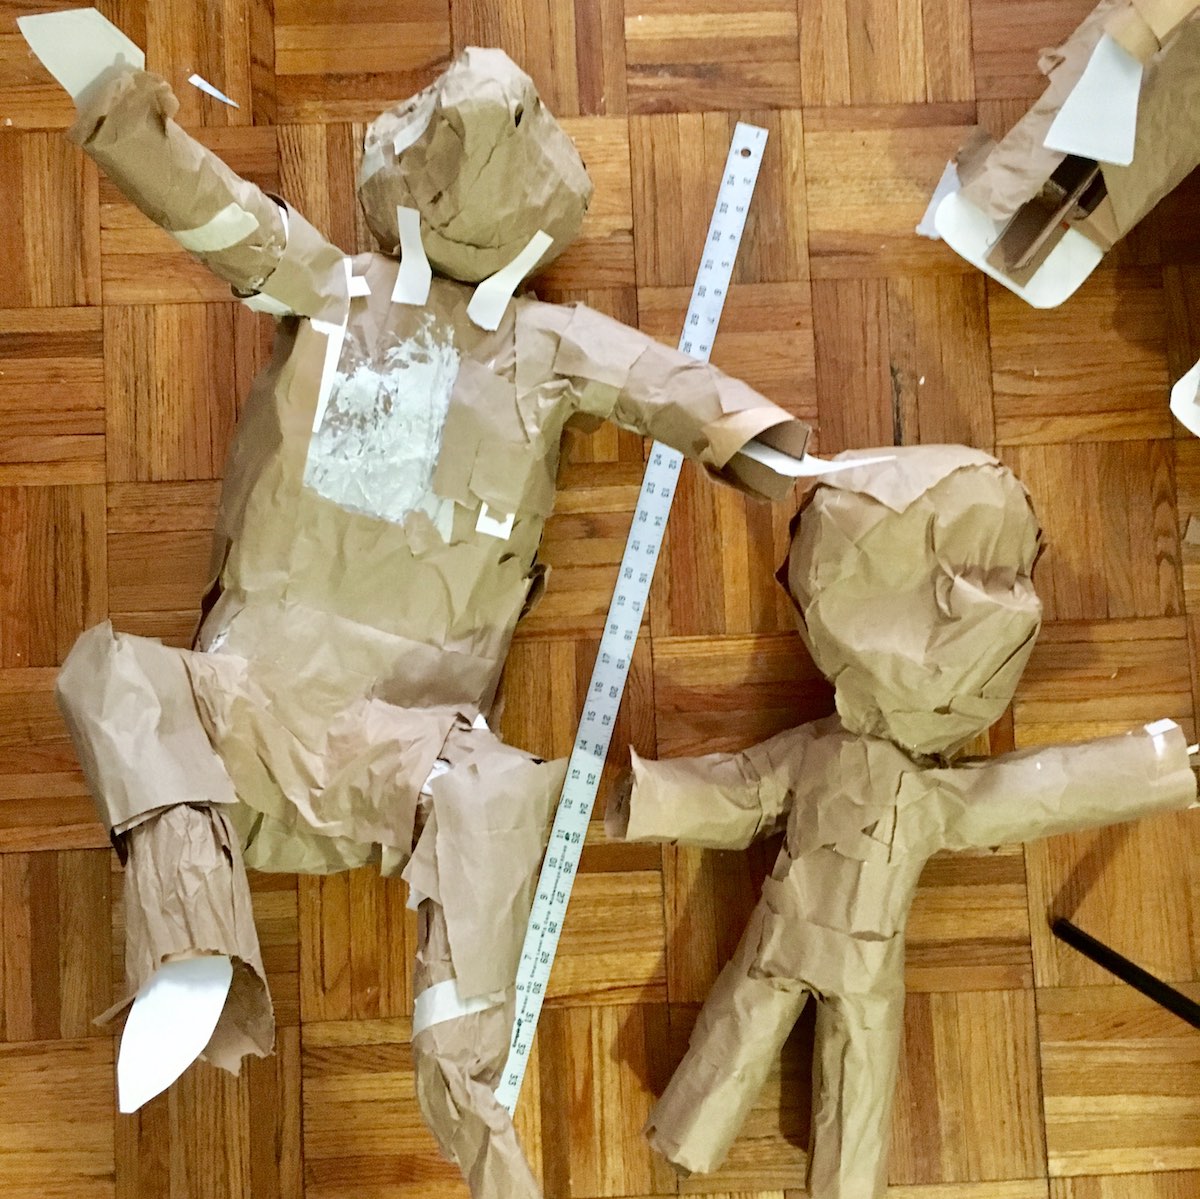 Posed armatures of a crouching lemur and a waving Bobby, wrapped in brown paper